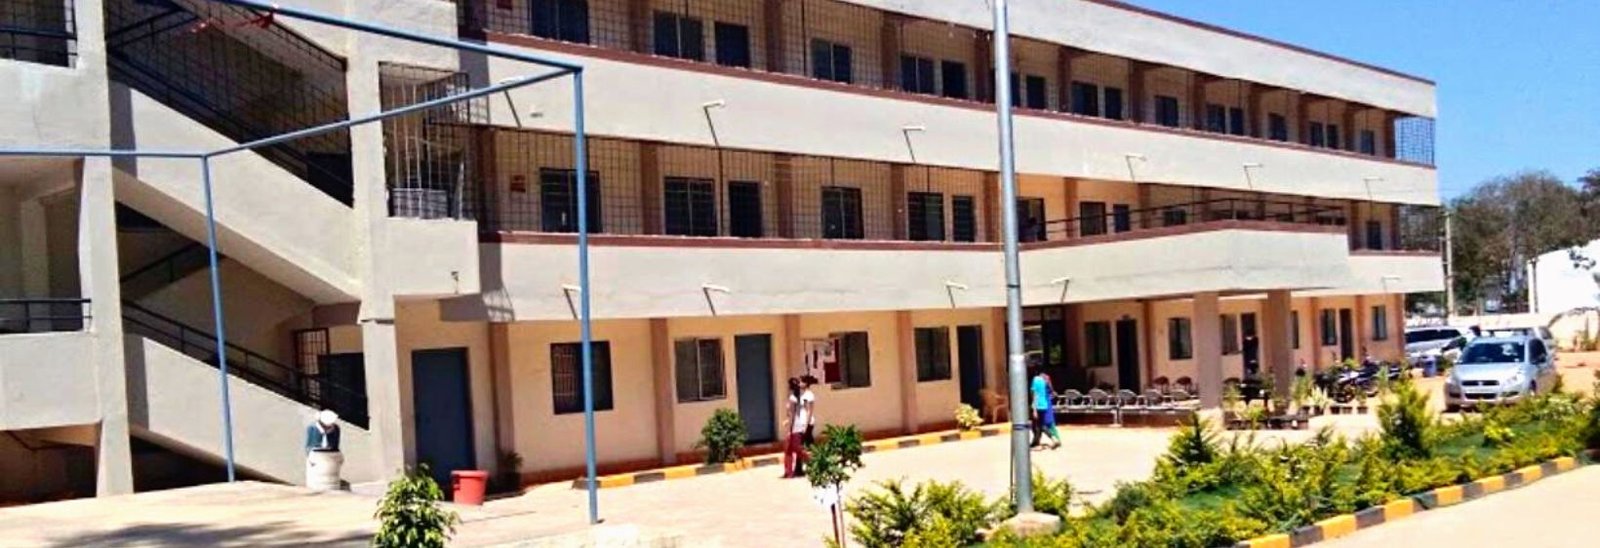 An image of the Rural College of Nursing Koppal, showing the main building and surrounding campus.